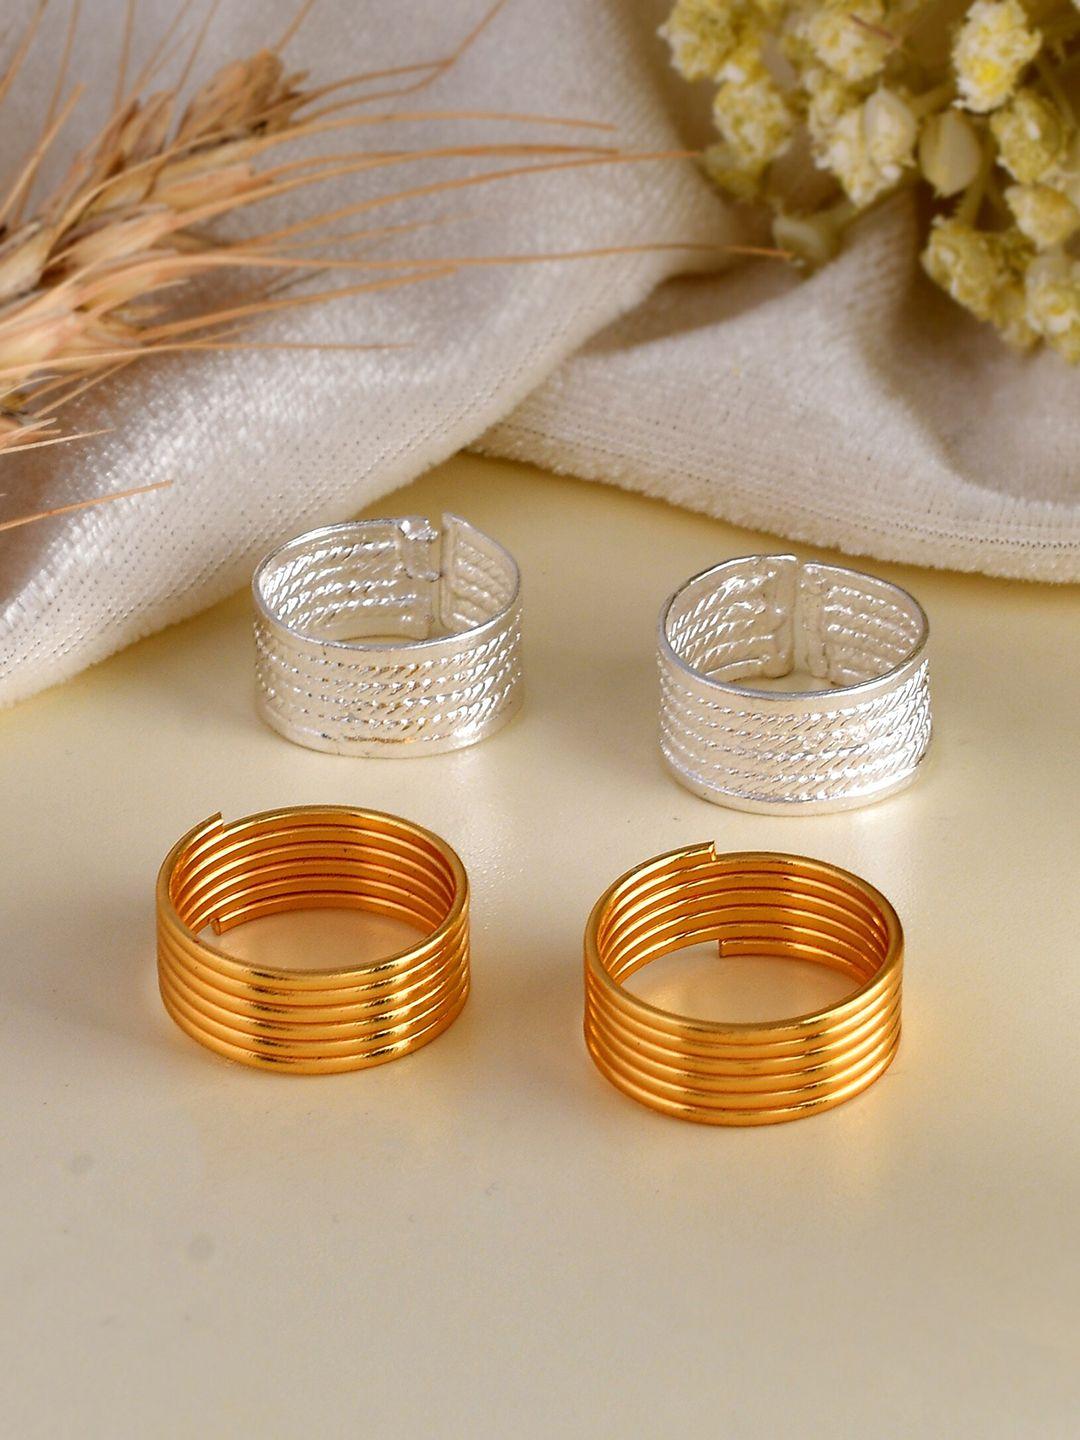 silvermerc designs set of 2 silver & gold-toned  toe rings